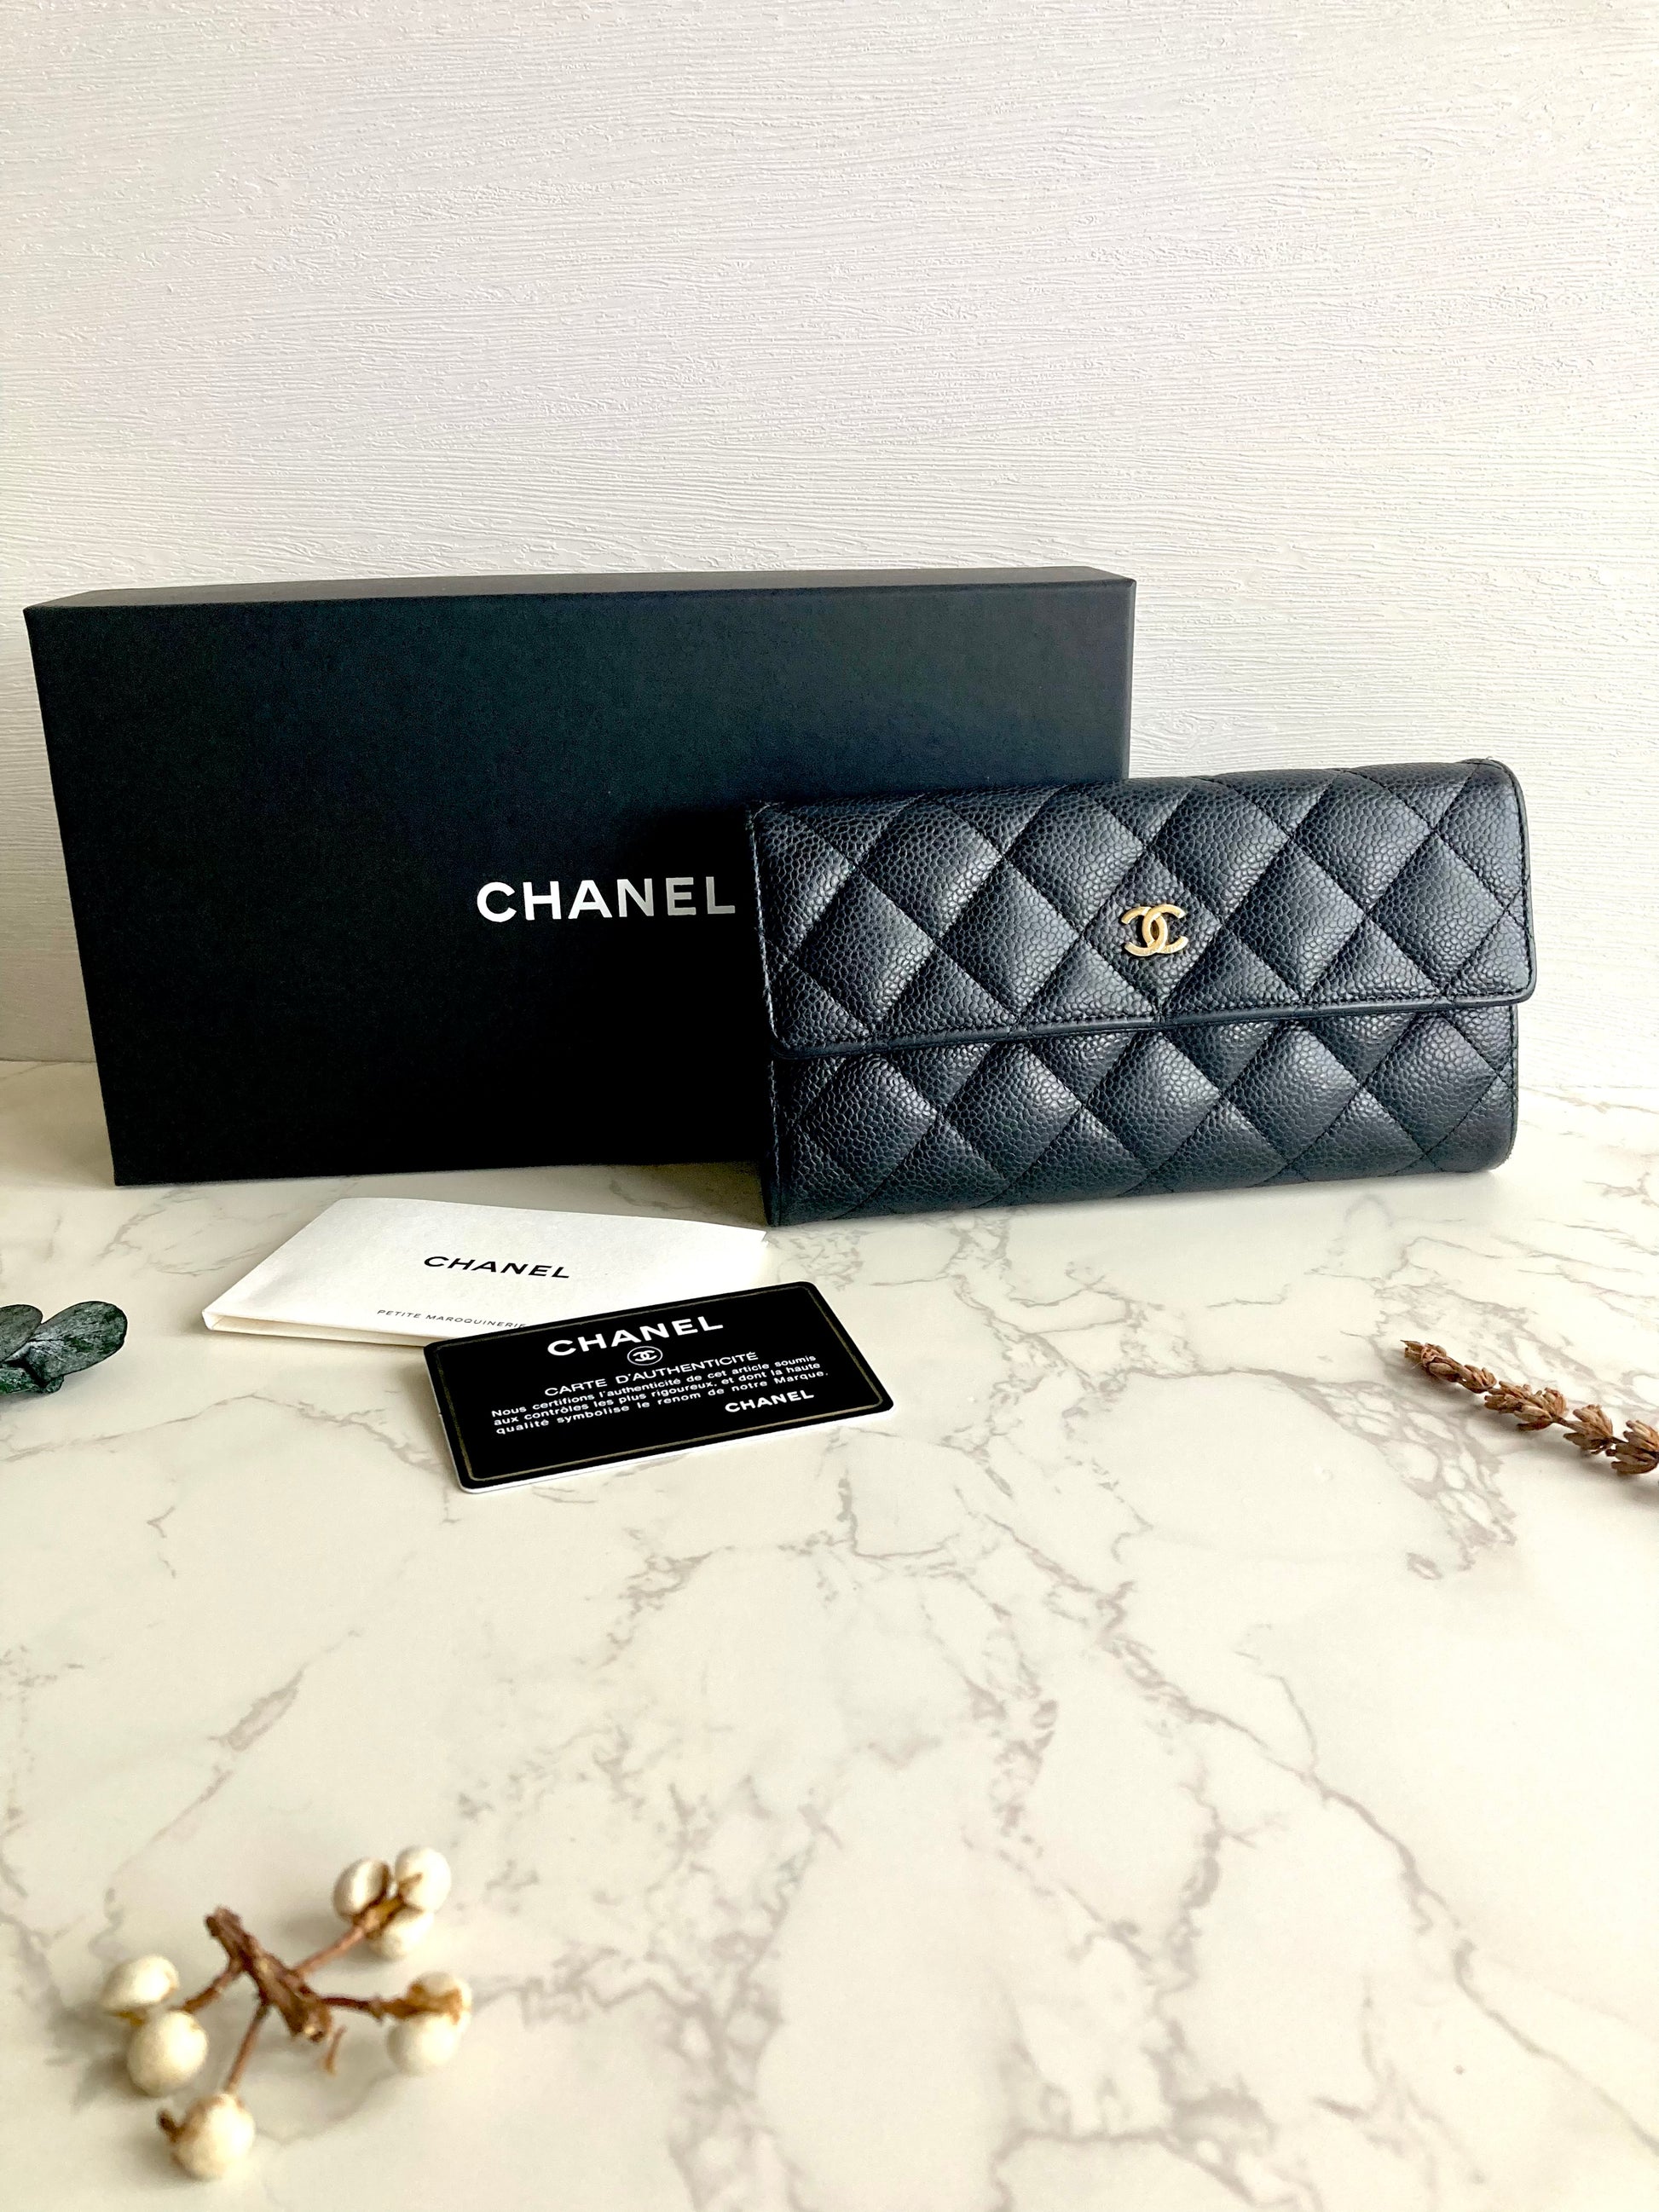 Nun's keys and soldier's bags: How Chanel's 2.55 became a classic